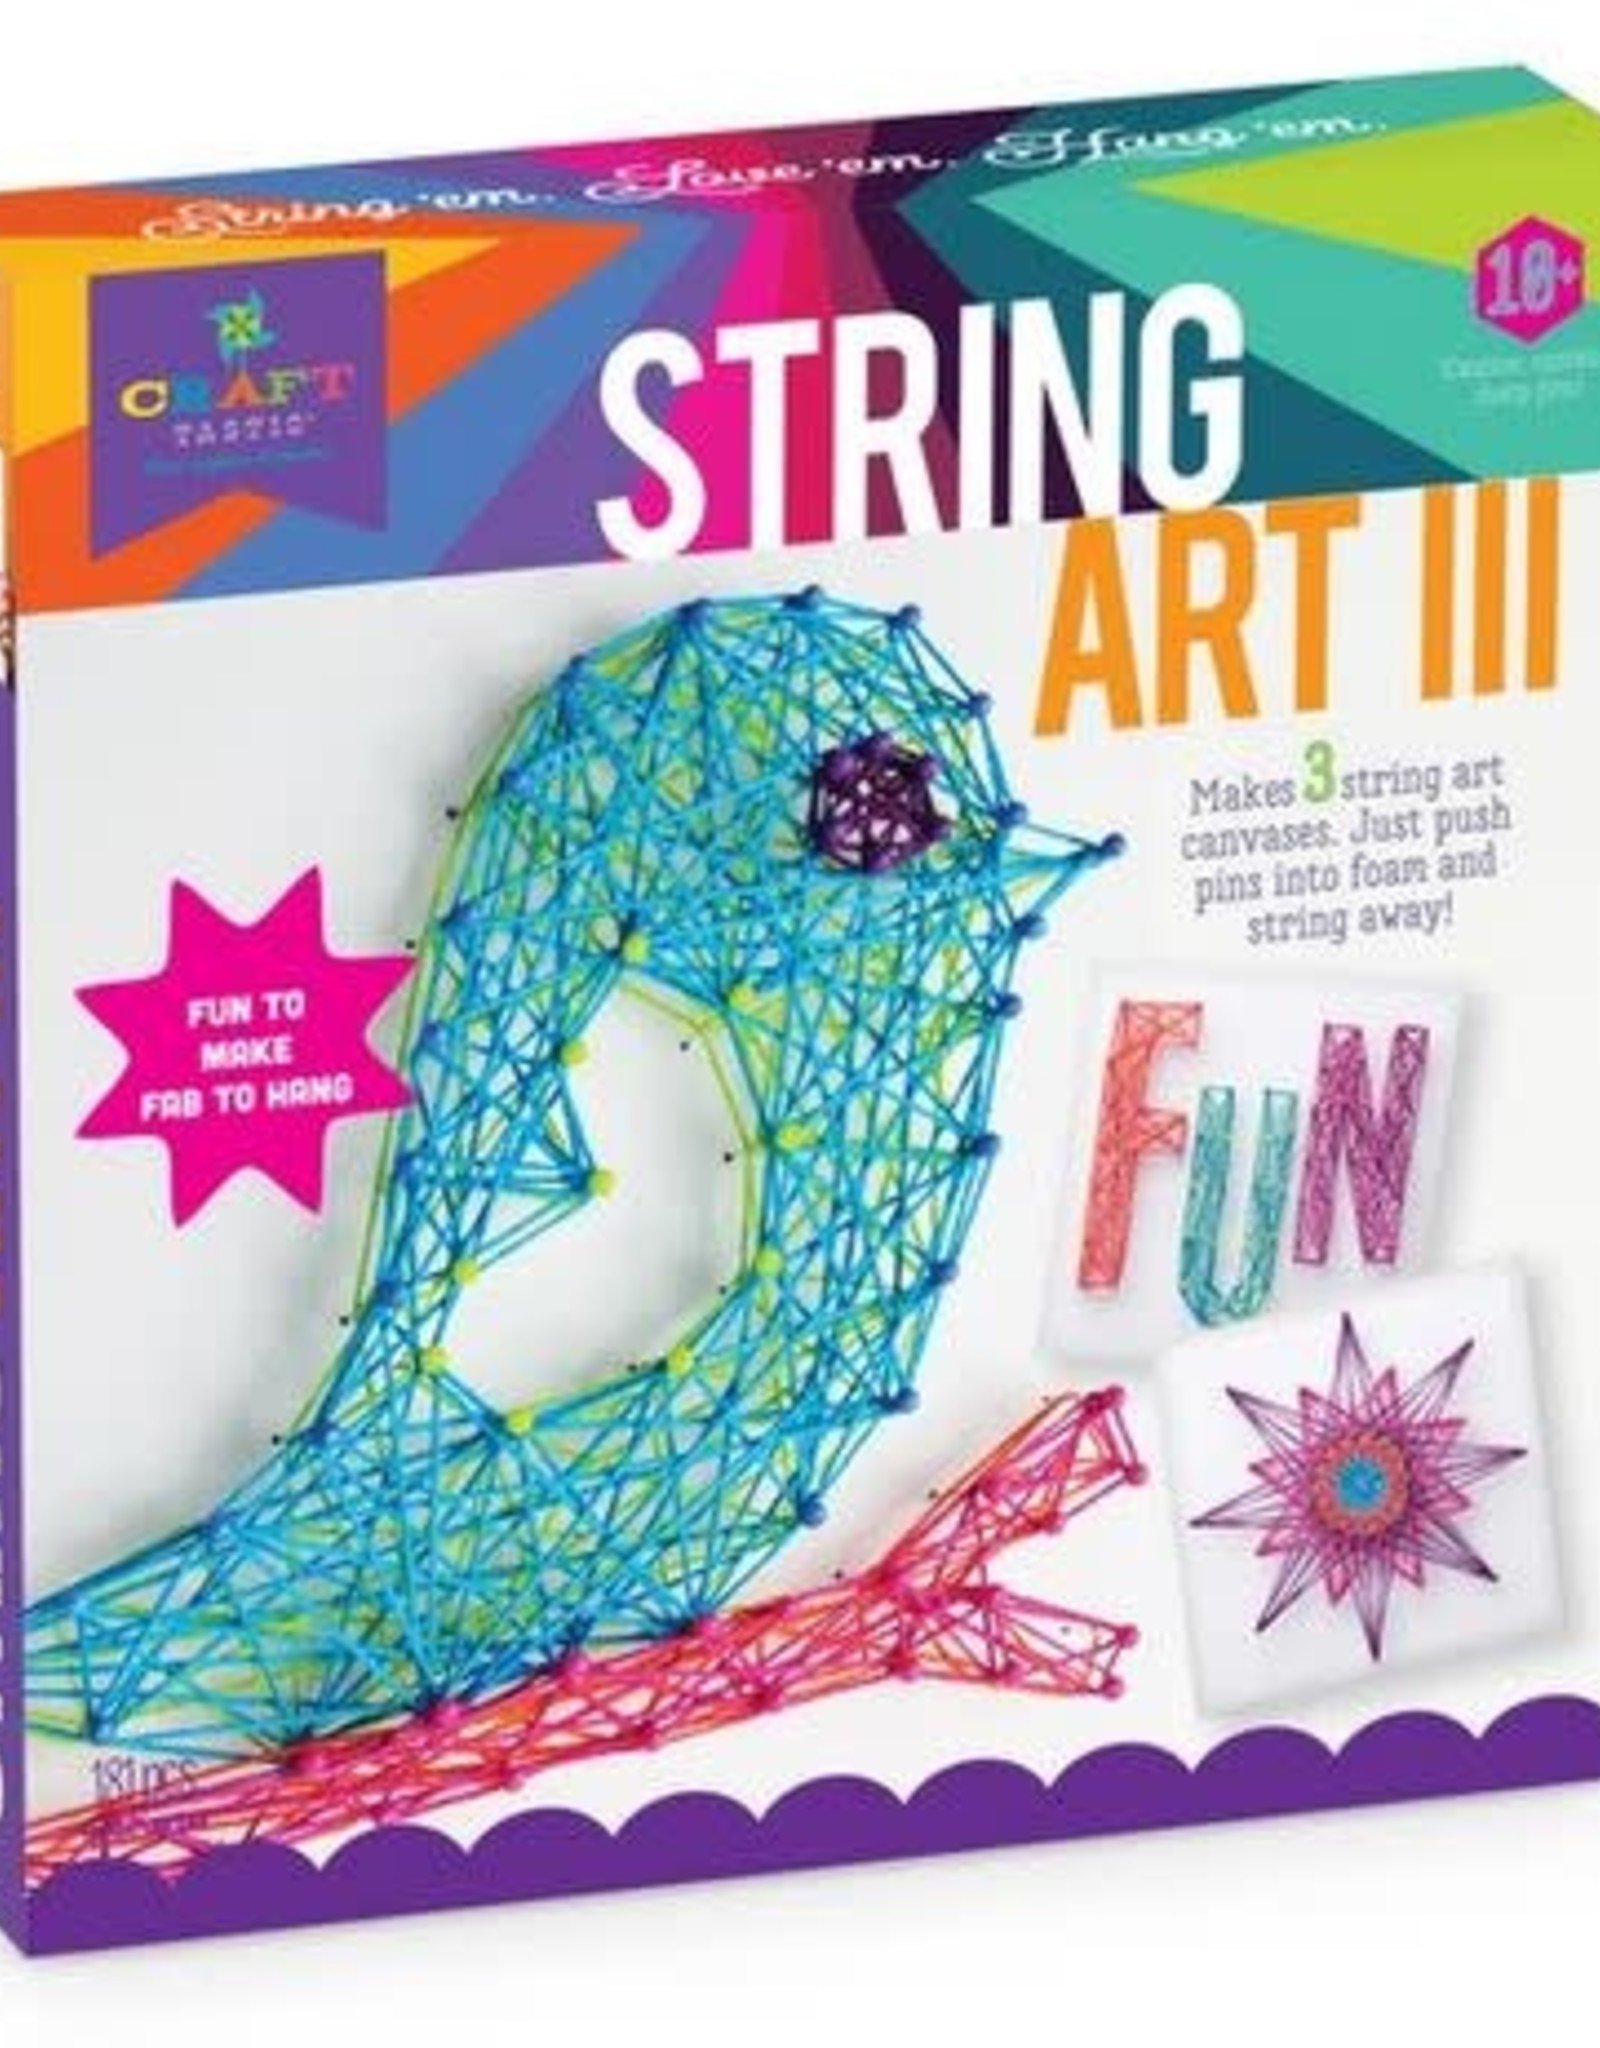 Craft-tastic String Art Kit III - Lets Play: Games & Toys